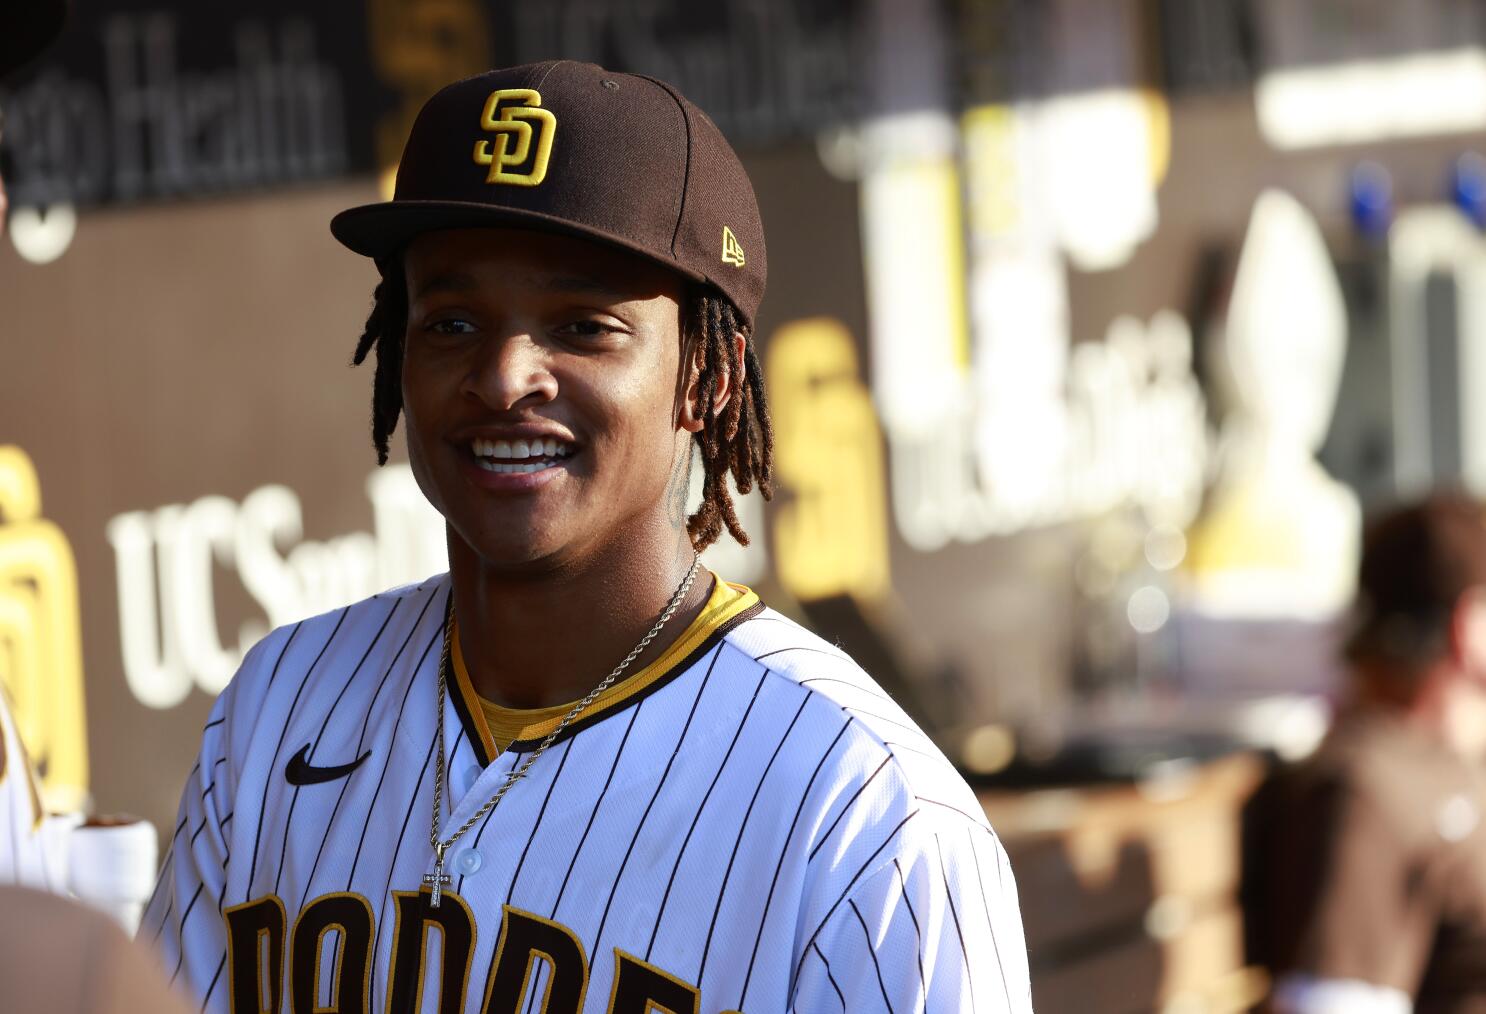 Padres notes: CJ Abrams returns in rhythm, Clevinger preparing to